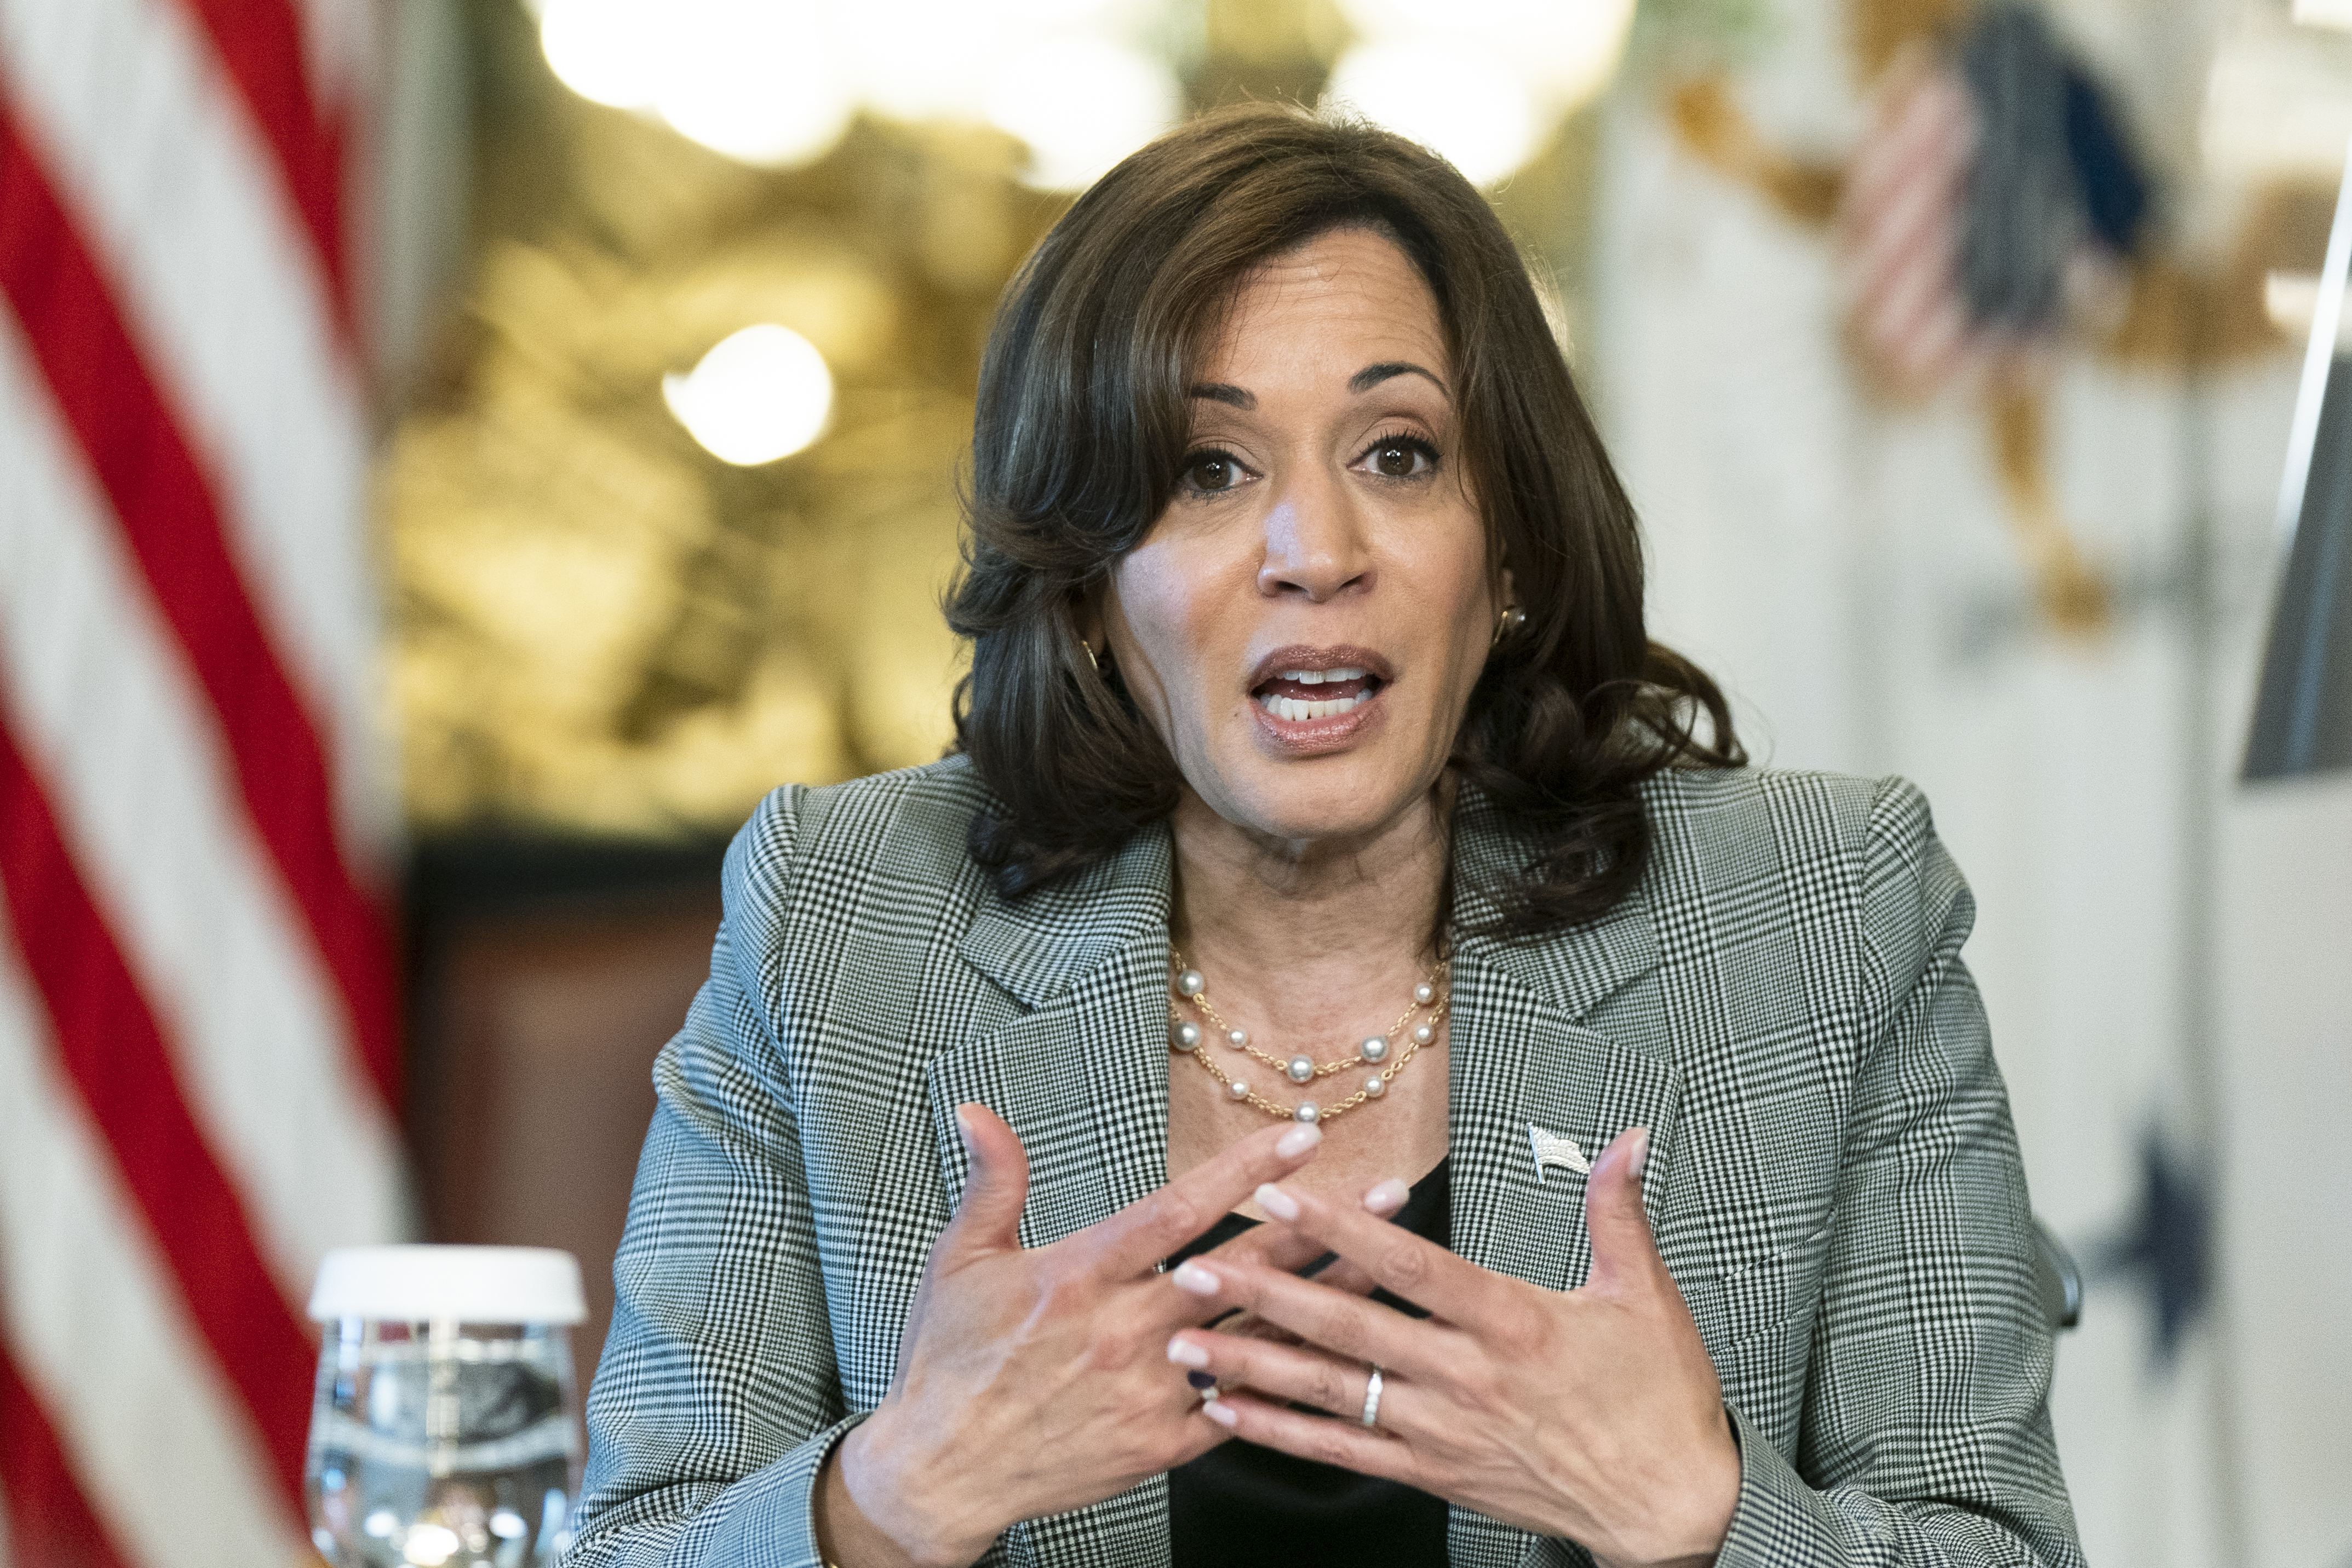 Kamala Harris: ‘My intention is to earn and win this nomination'